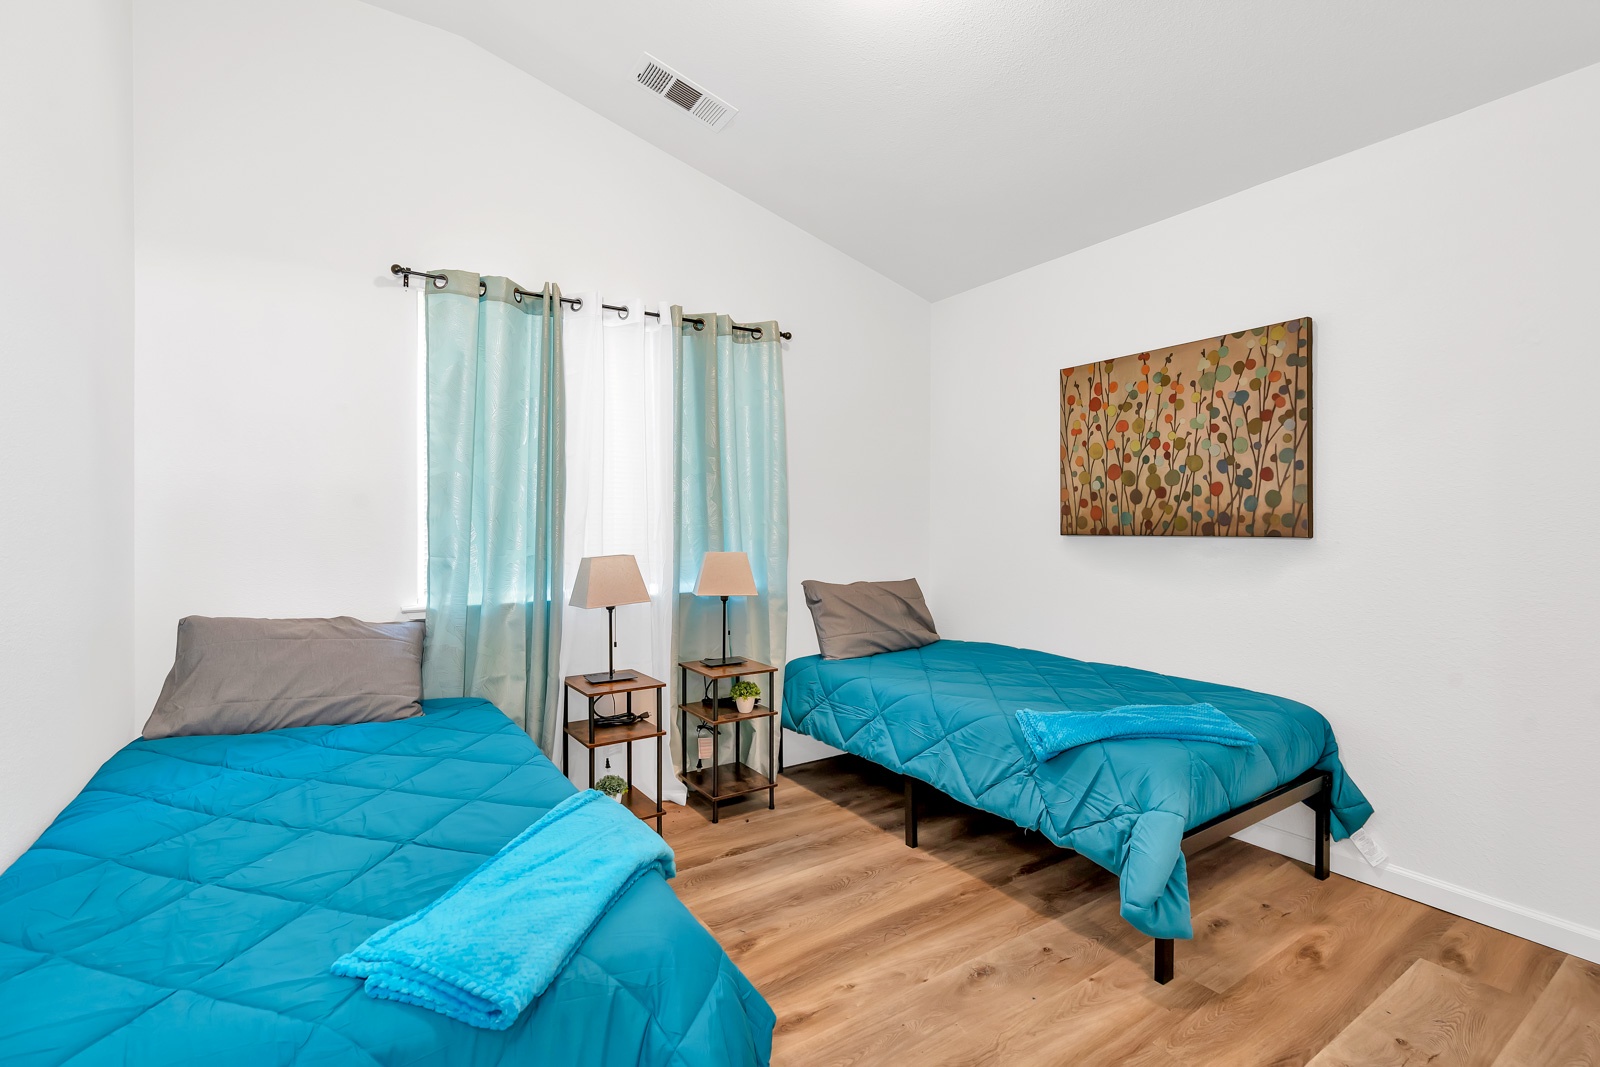 The double twin bedroom offers high ceilings & lots of space